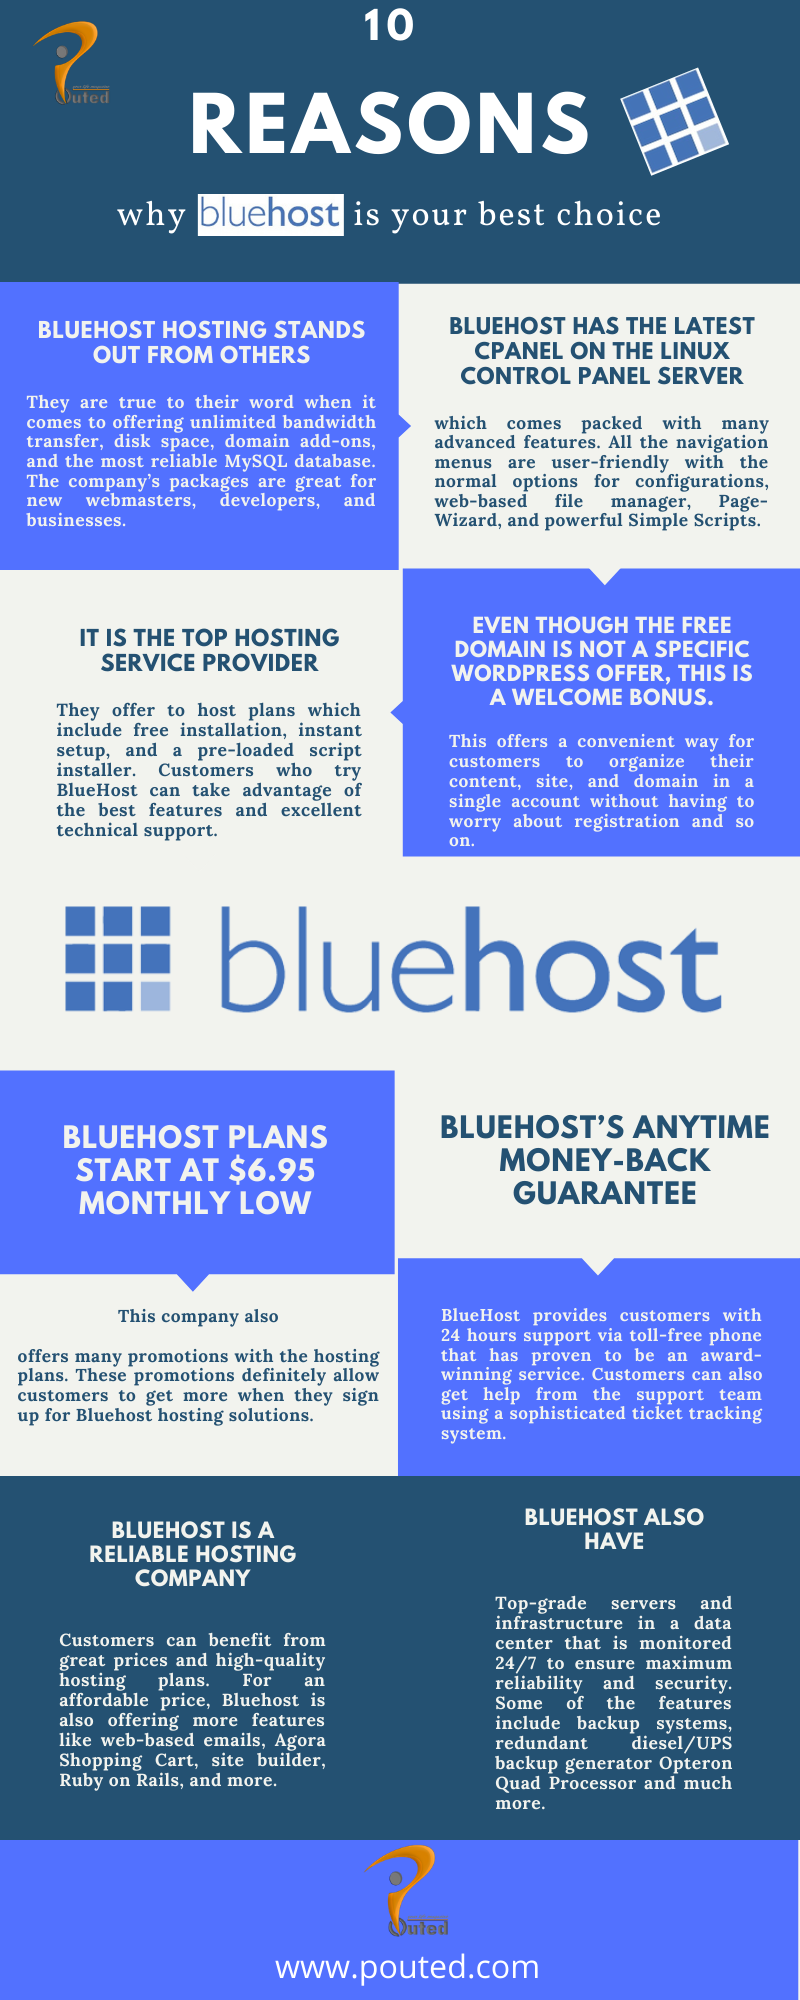 Bluehost review of features, pros, cons, services,...